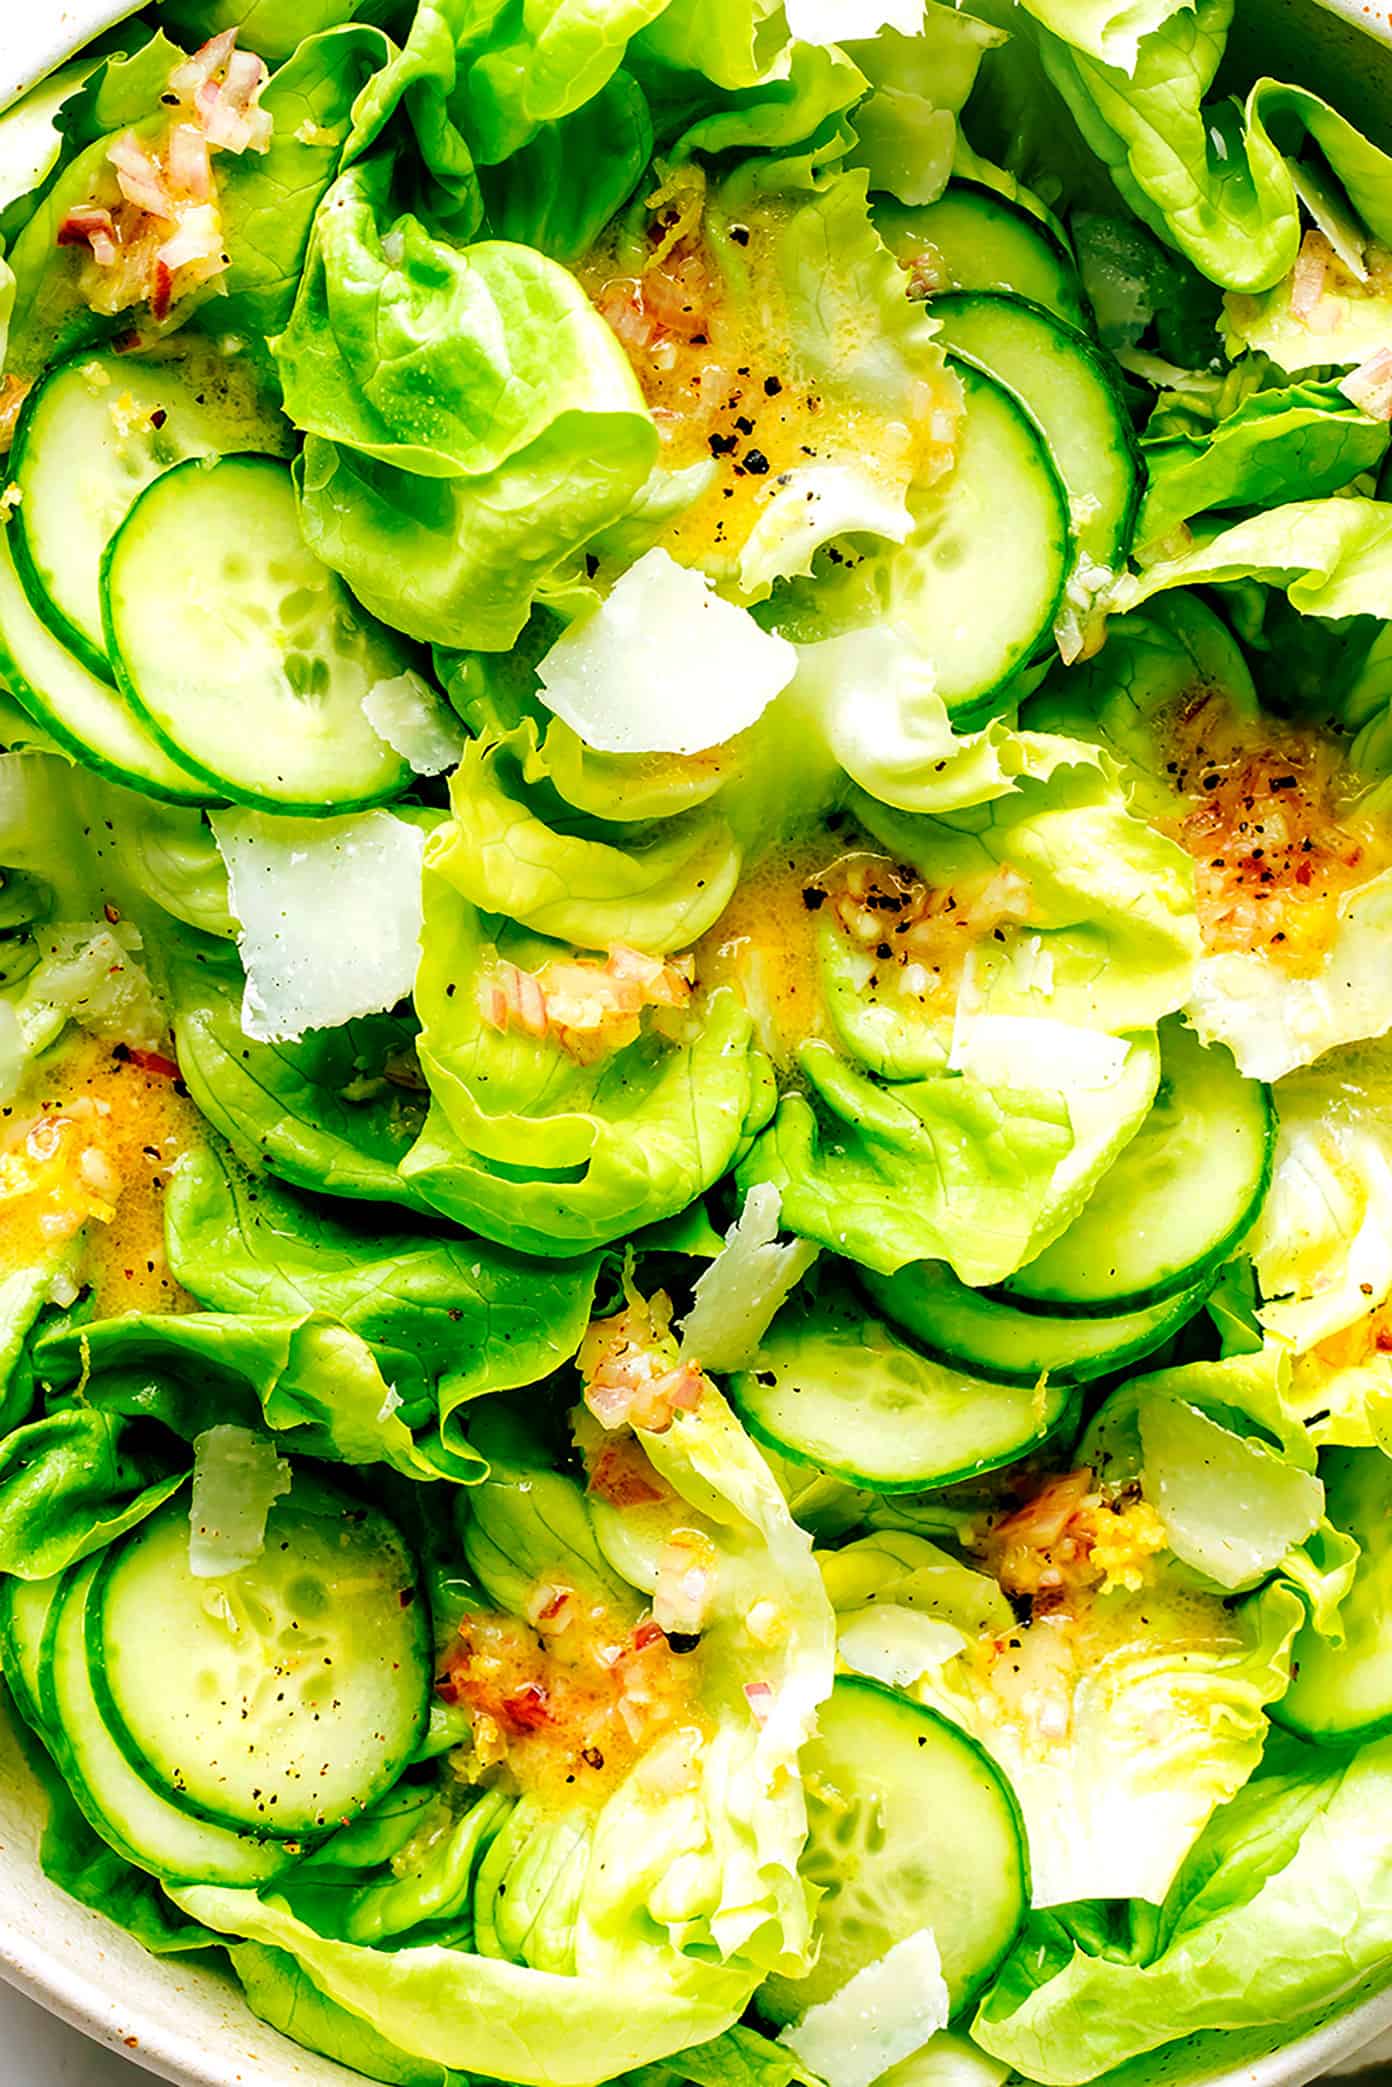 Butter lettuce salad with french dressing close-up